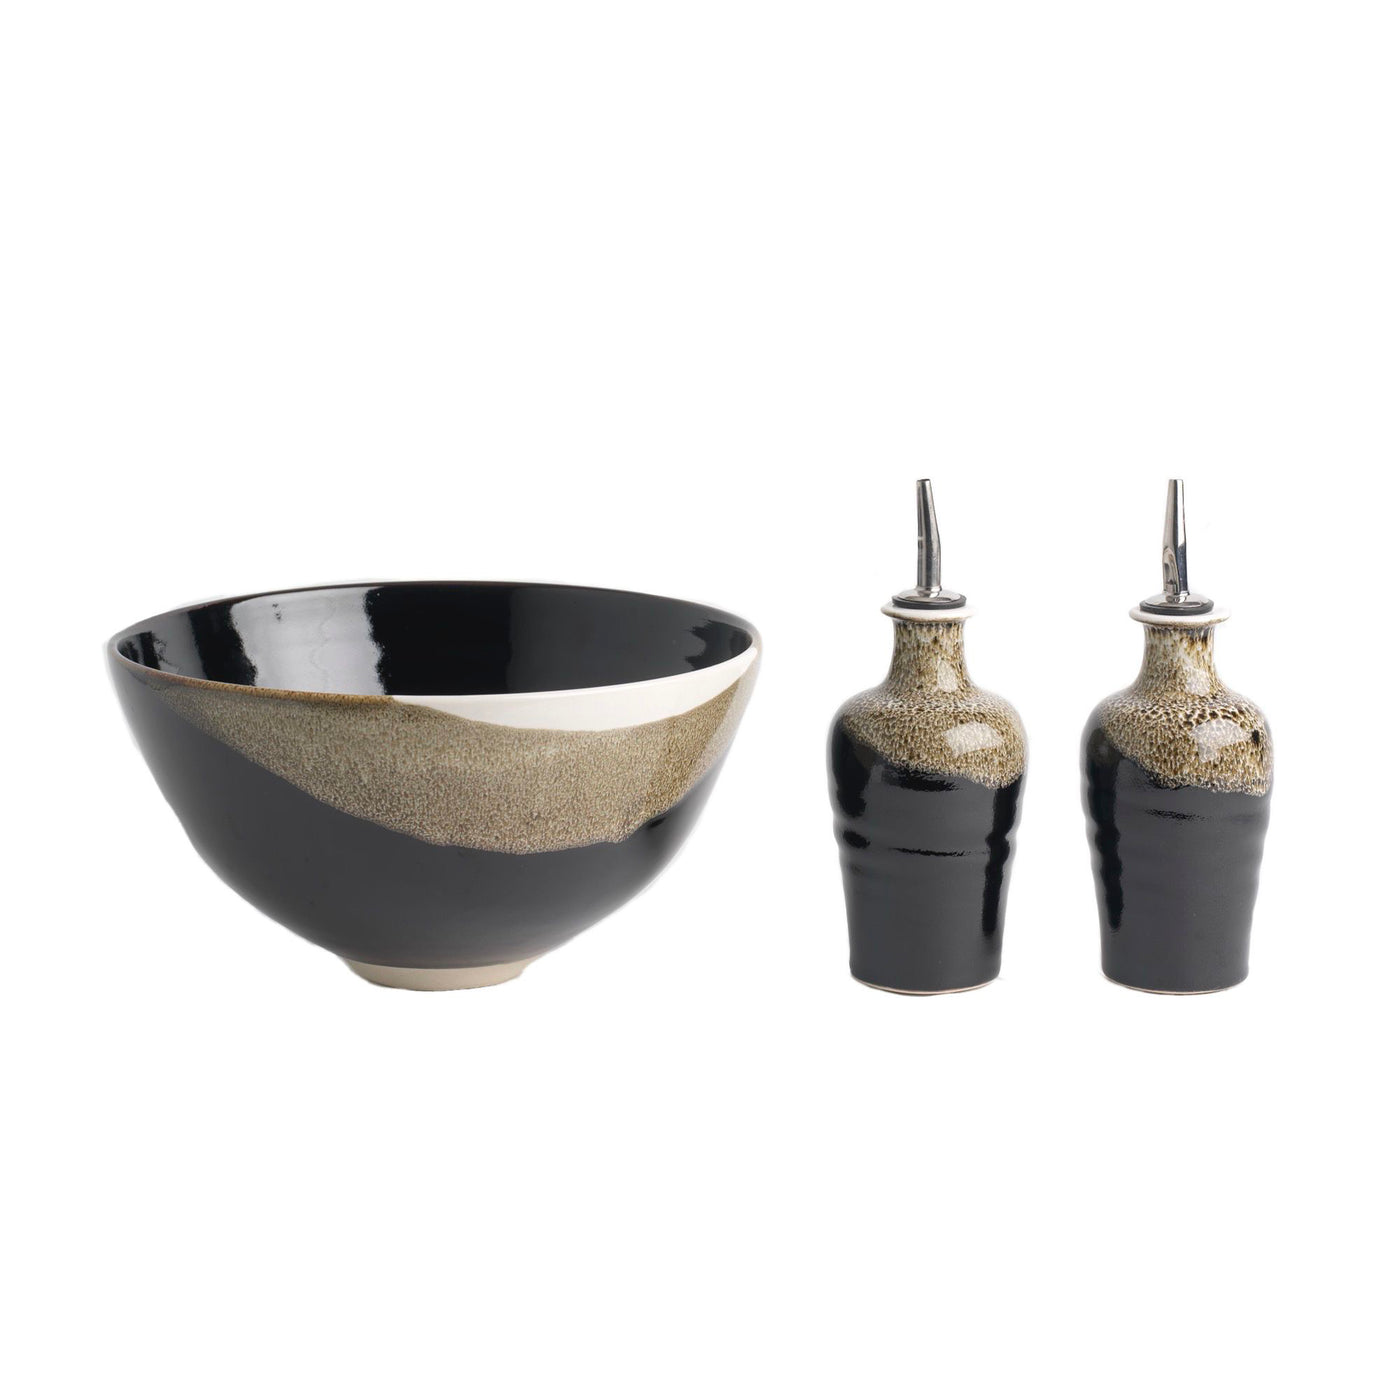 Salad Bowl and Set of Oil/Vinegar Pourers (129B/137Fx2), Louis Mulcahy Pottery